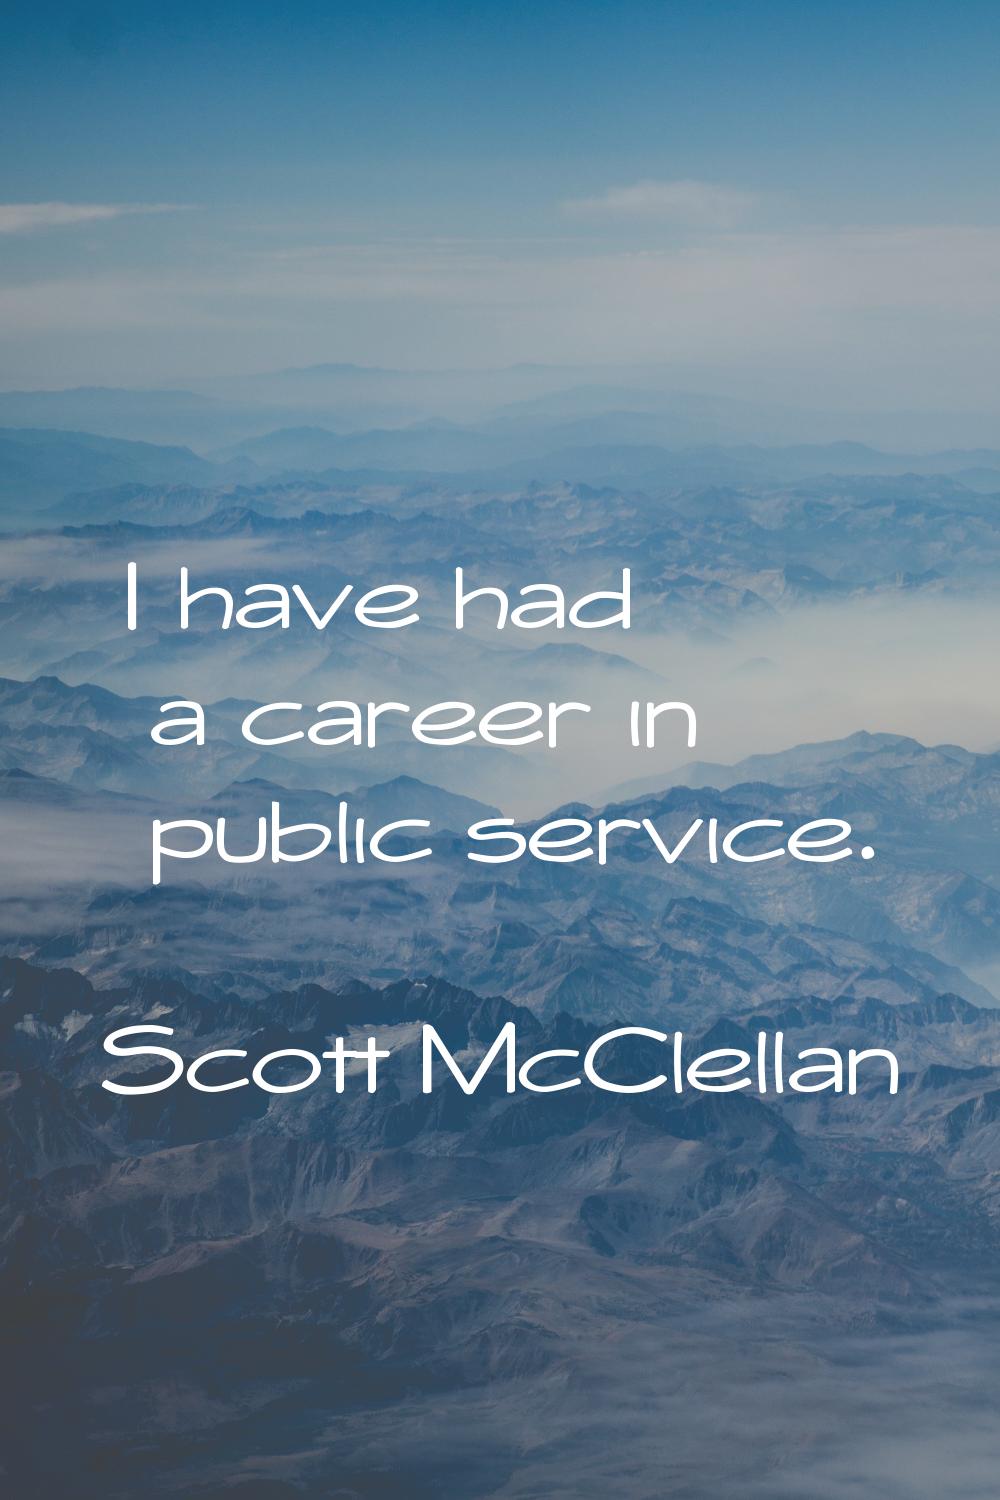 I have had a career in public service.